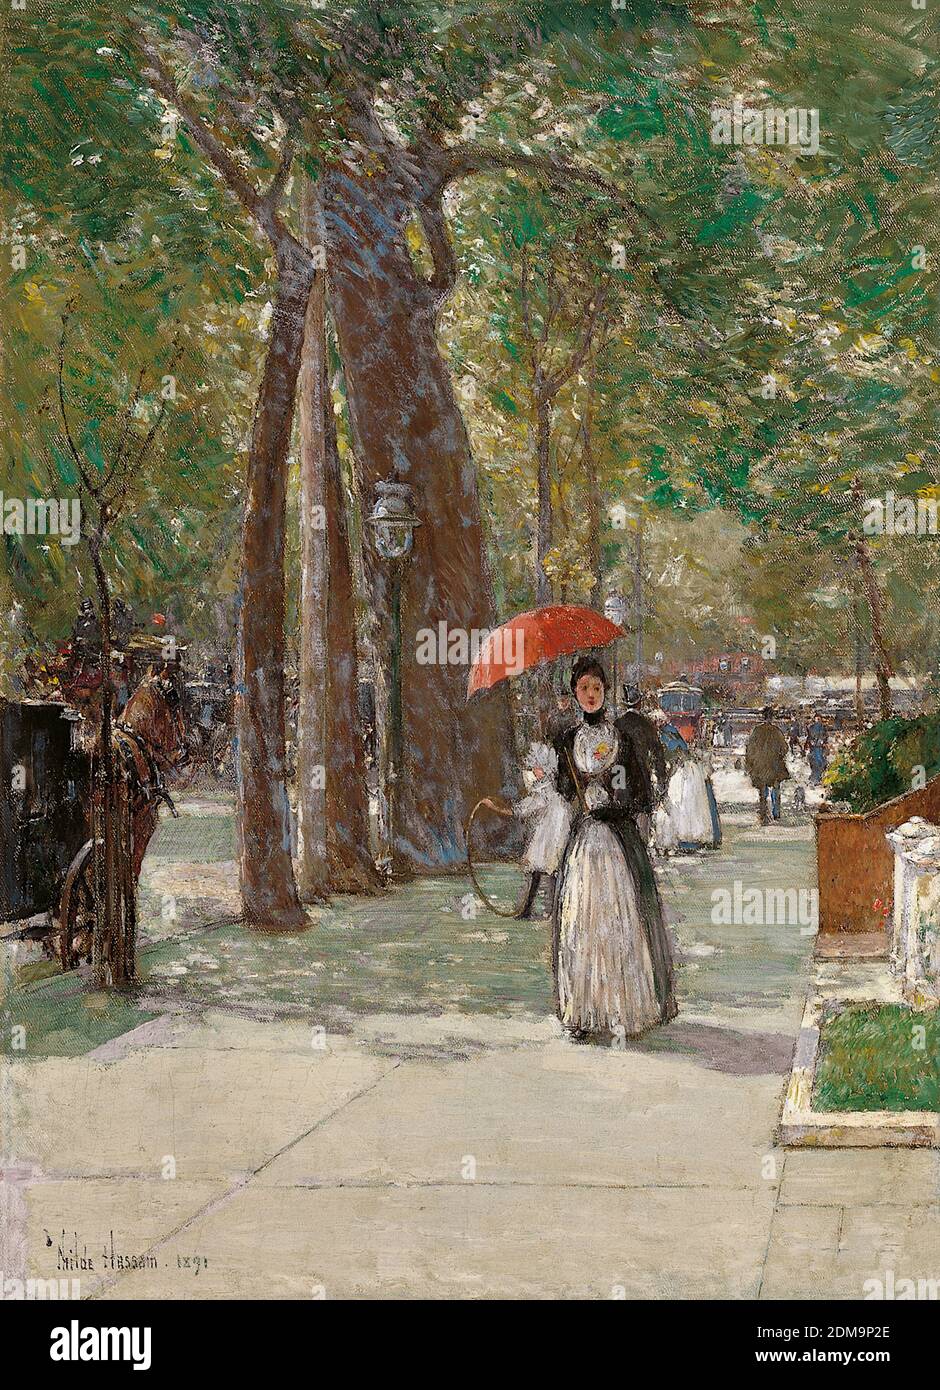 Fifth Avenue at Washington Square, New York 1891 American Impressionist Painting by Childe Hassam - Very high resolution and quality image Stock Photo